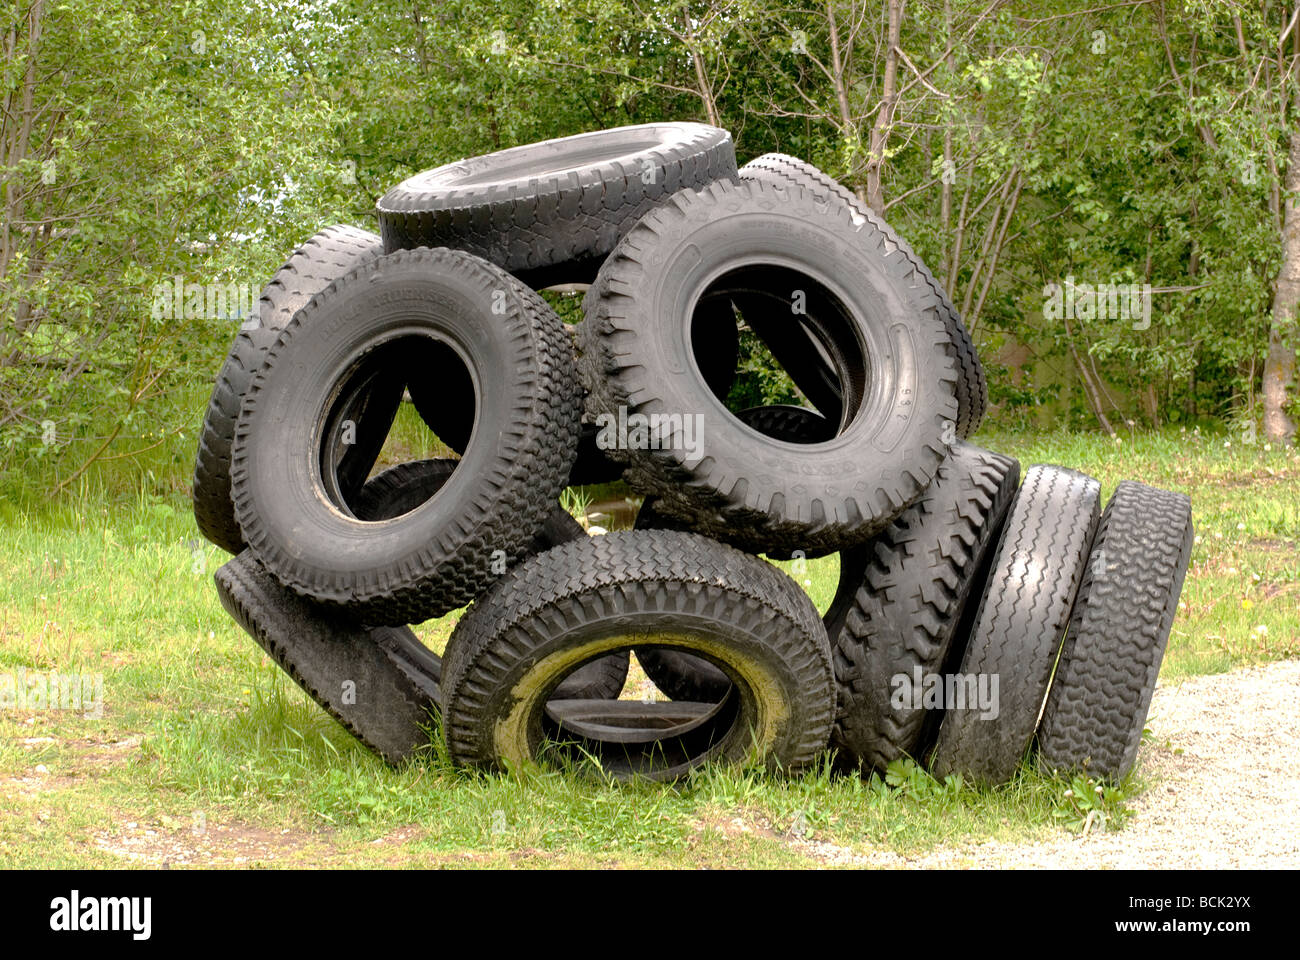 A Jungle Gym Constructed of Old Tires at a Resort Playground Stock Photo -  Alamy